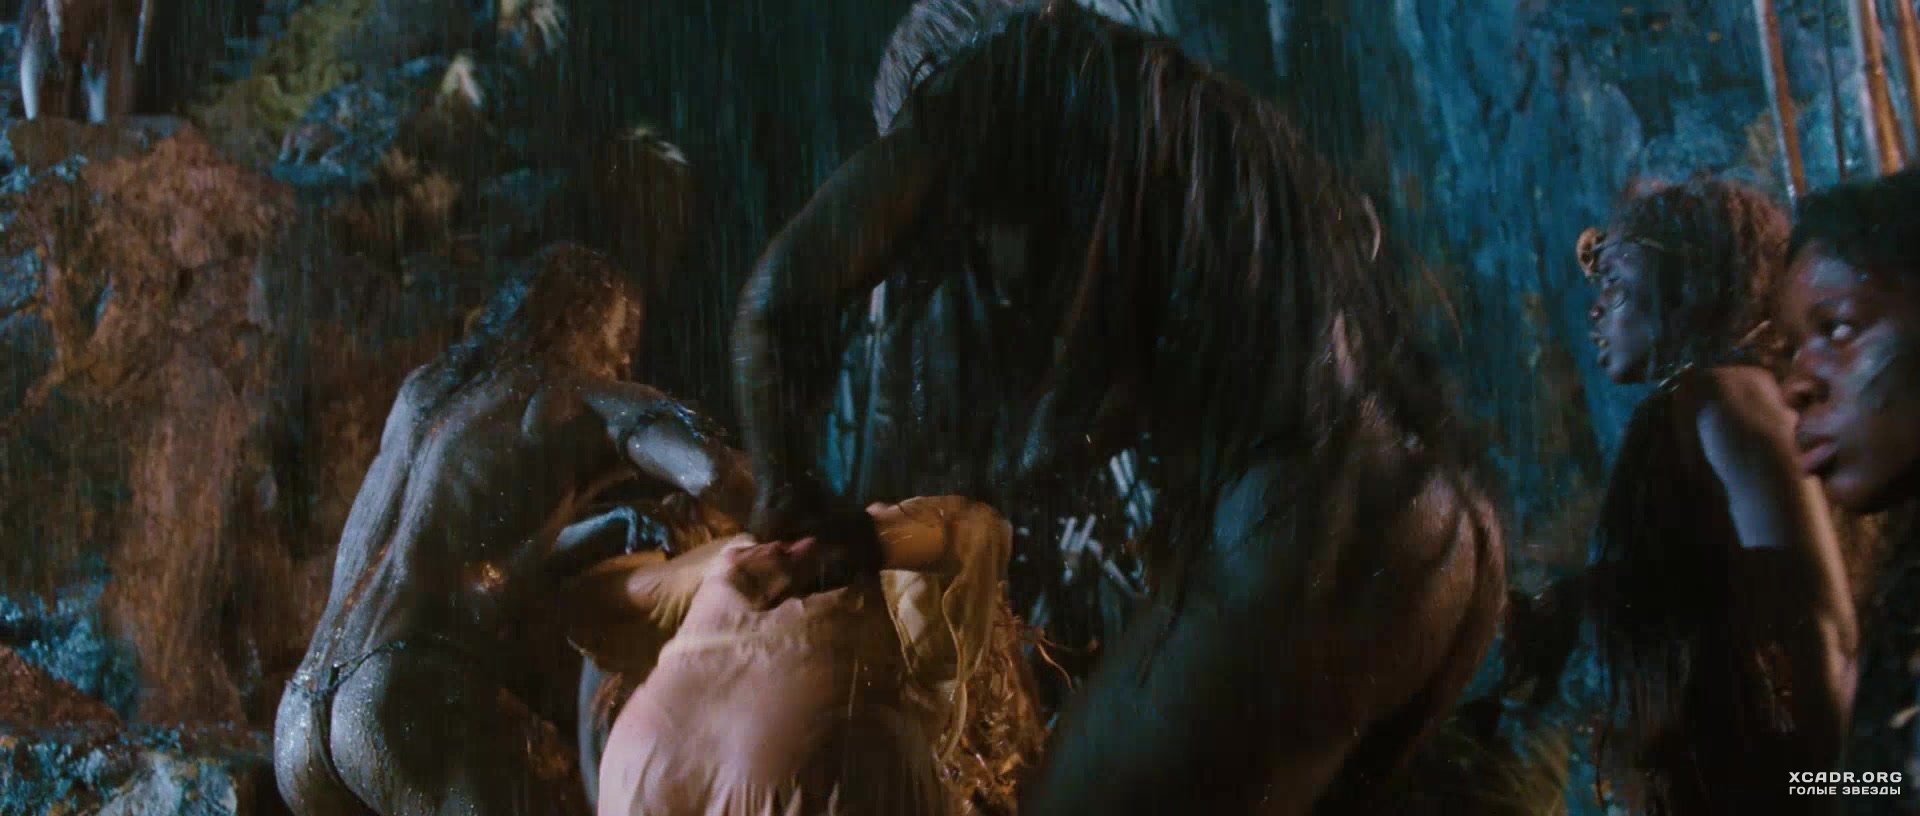 Sexiest King Kong Scenes, Top Pics Clips